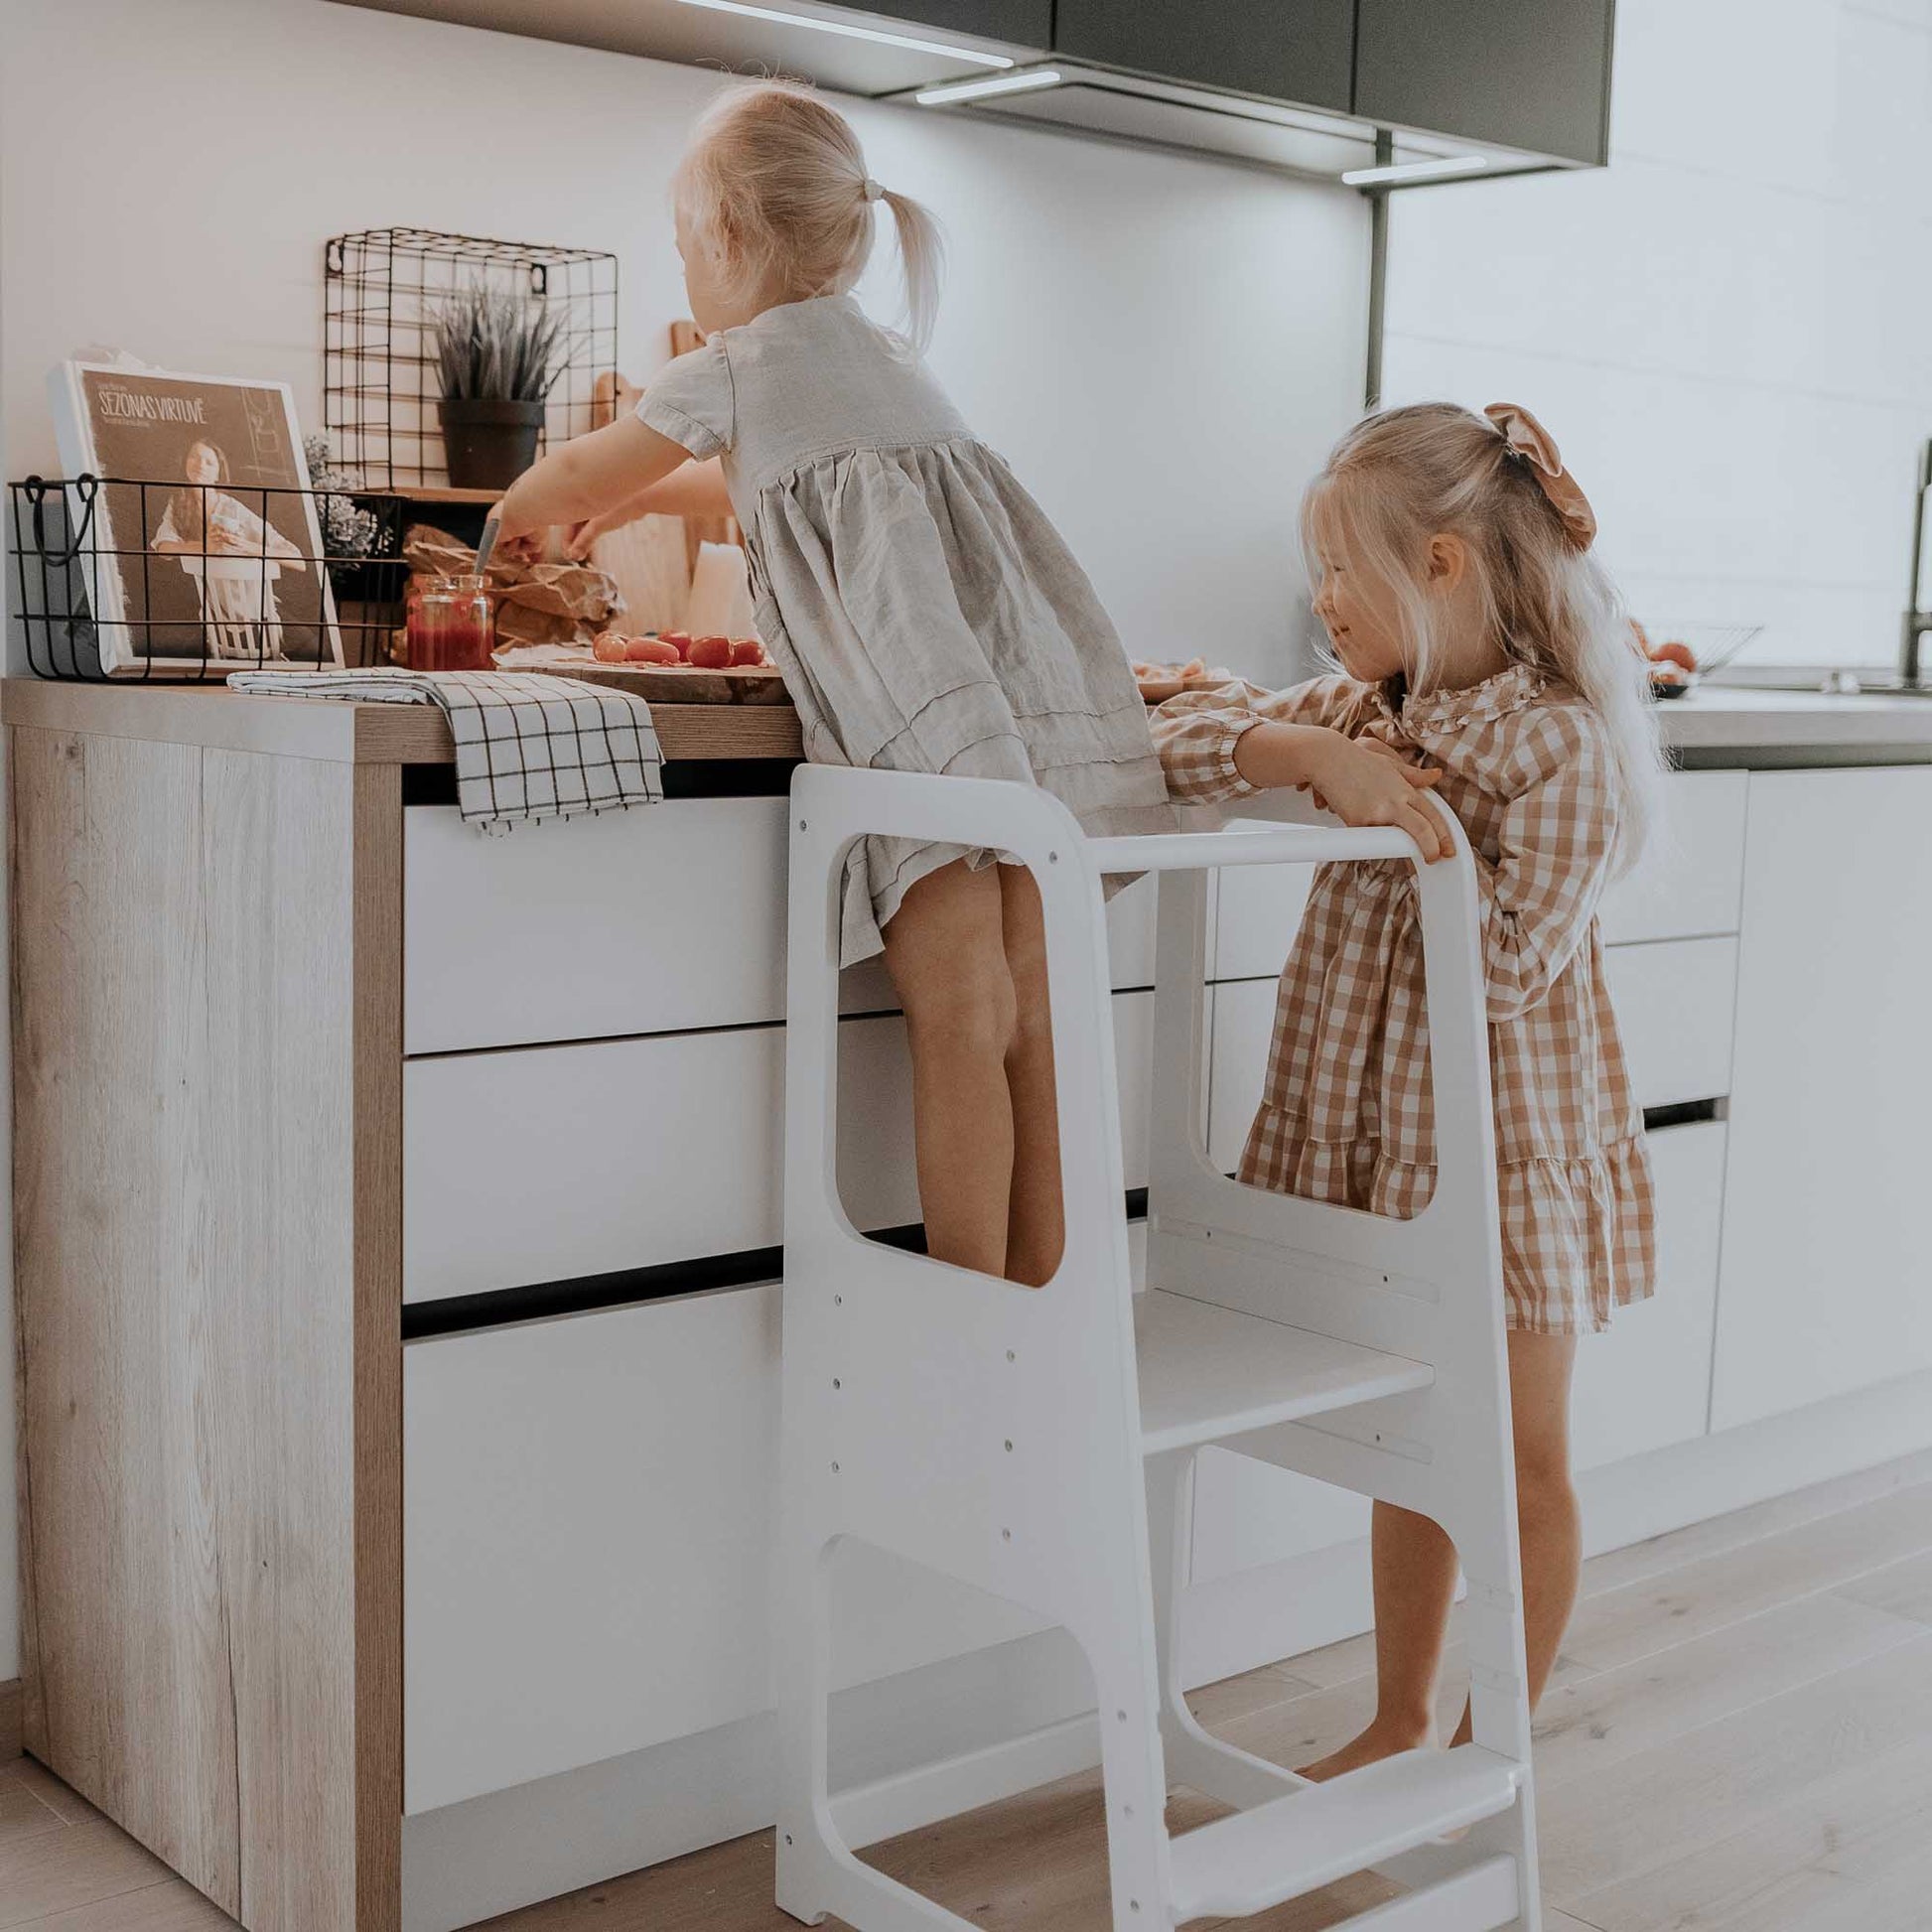 Two little girls standing on a Sweet Home From Wood Kids' kitchen tower with 3 height levels in a kitchen.